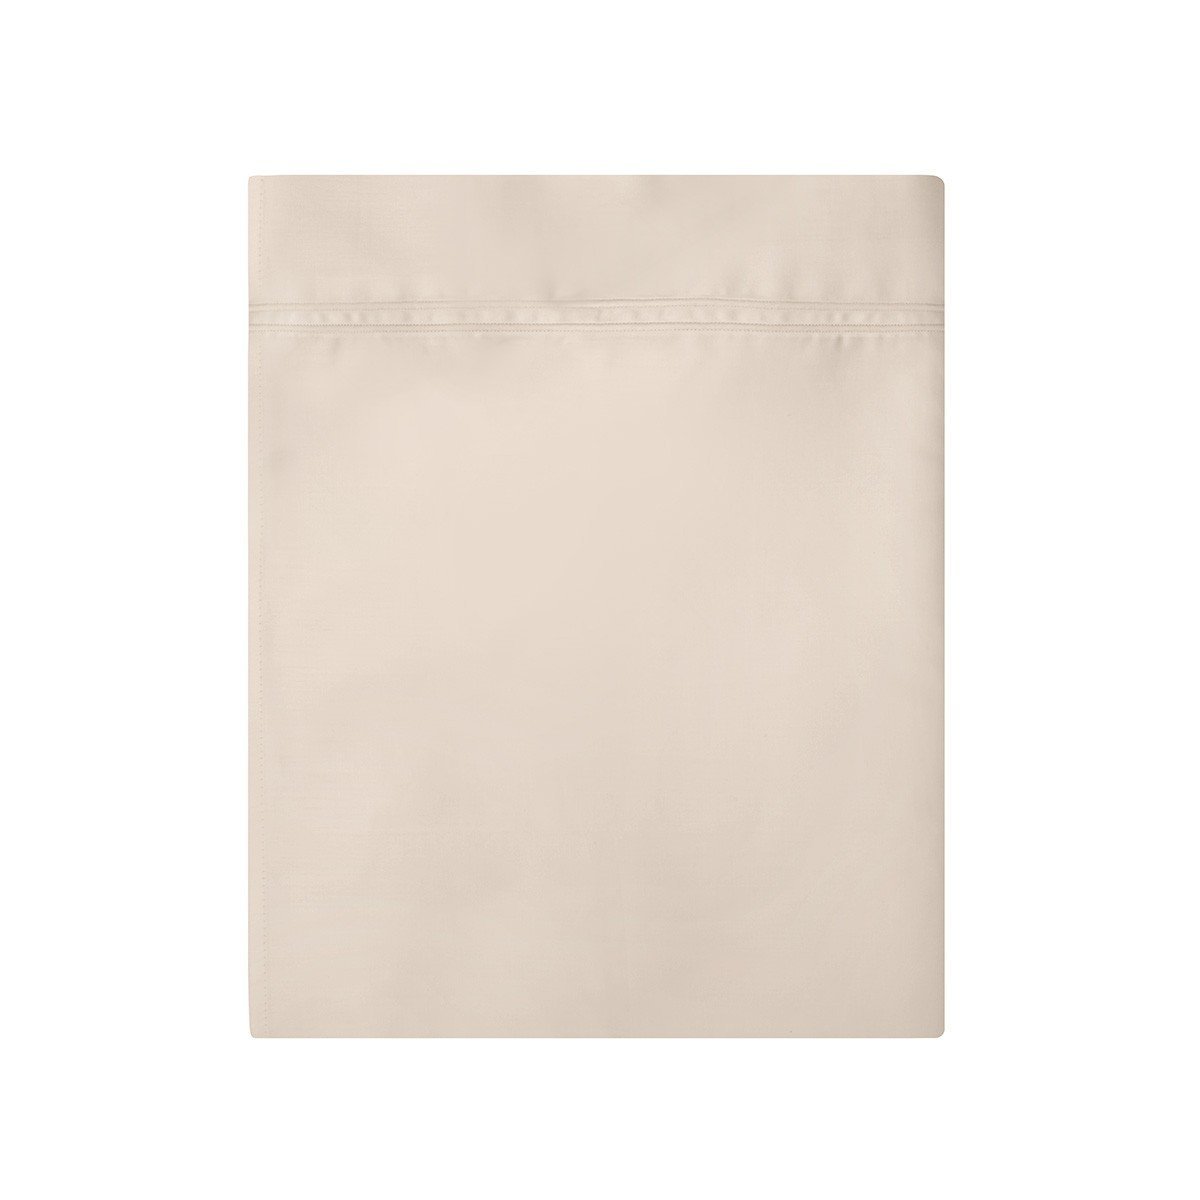 Triomphe Nacre Ivory Bedding by Yves Delorme | Fig Linens - Flat sheet